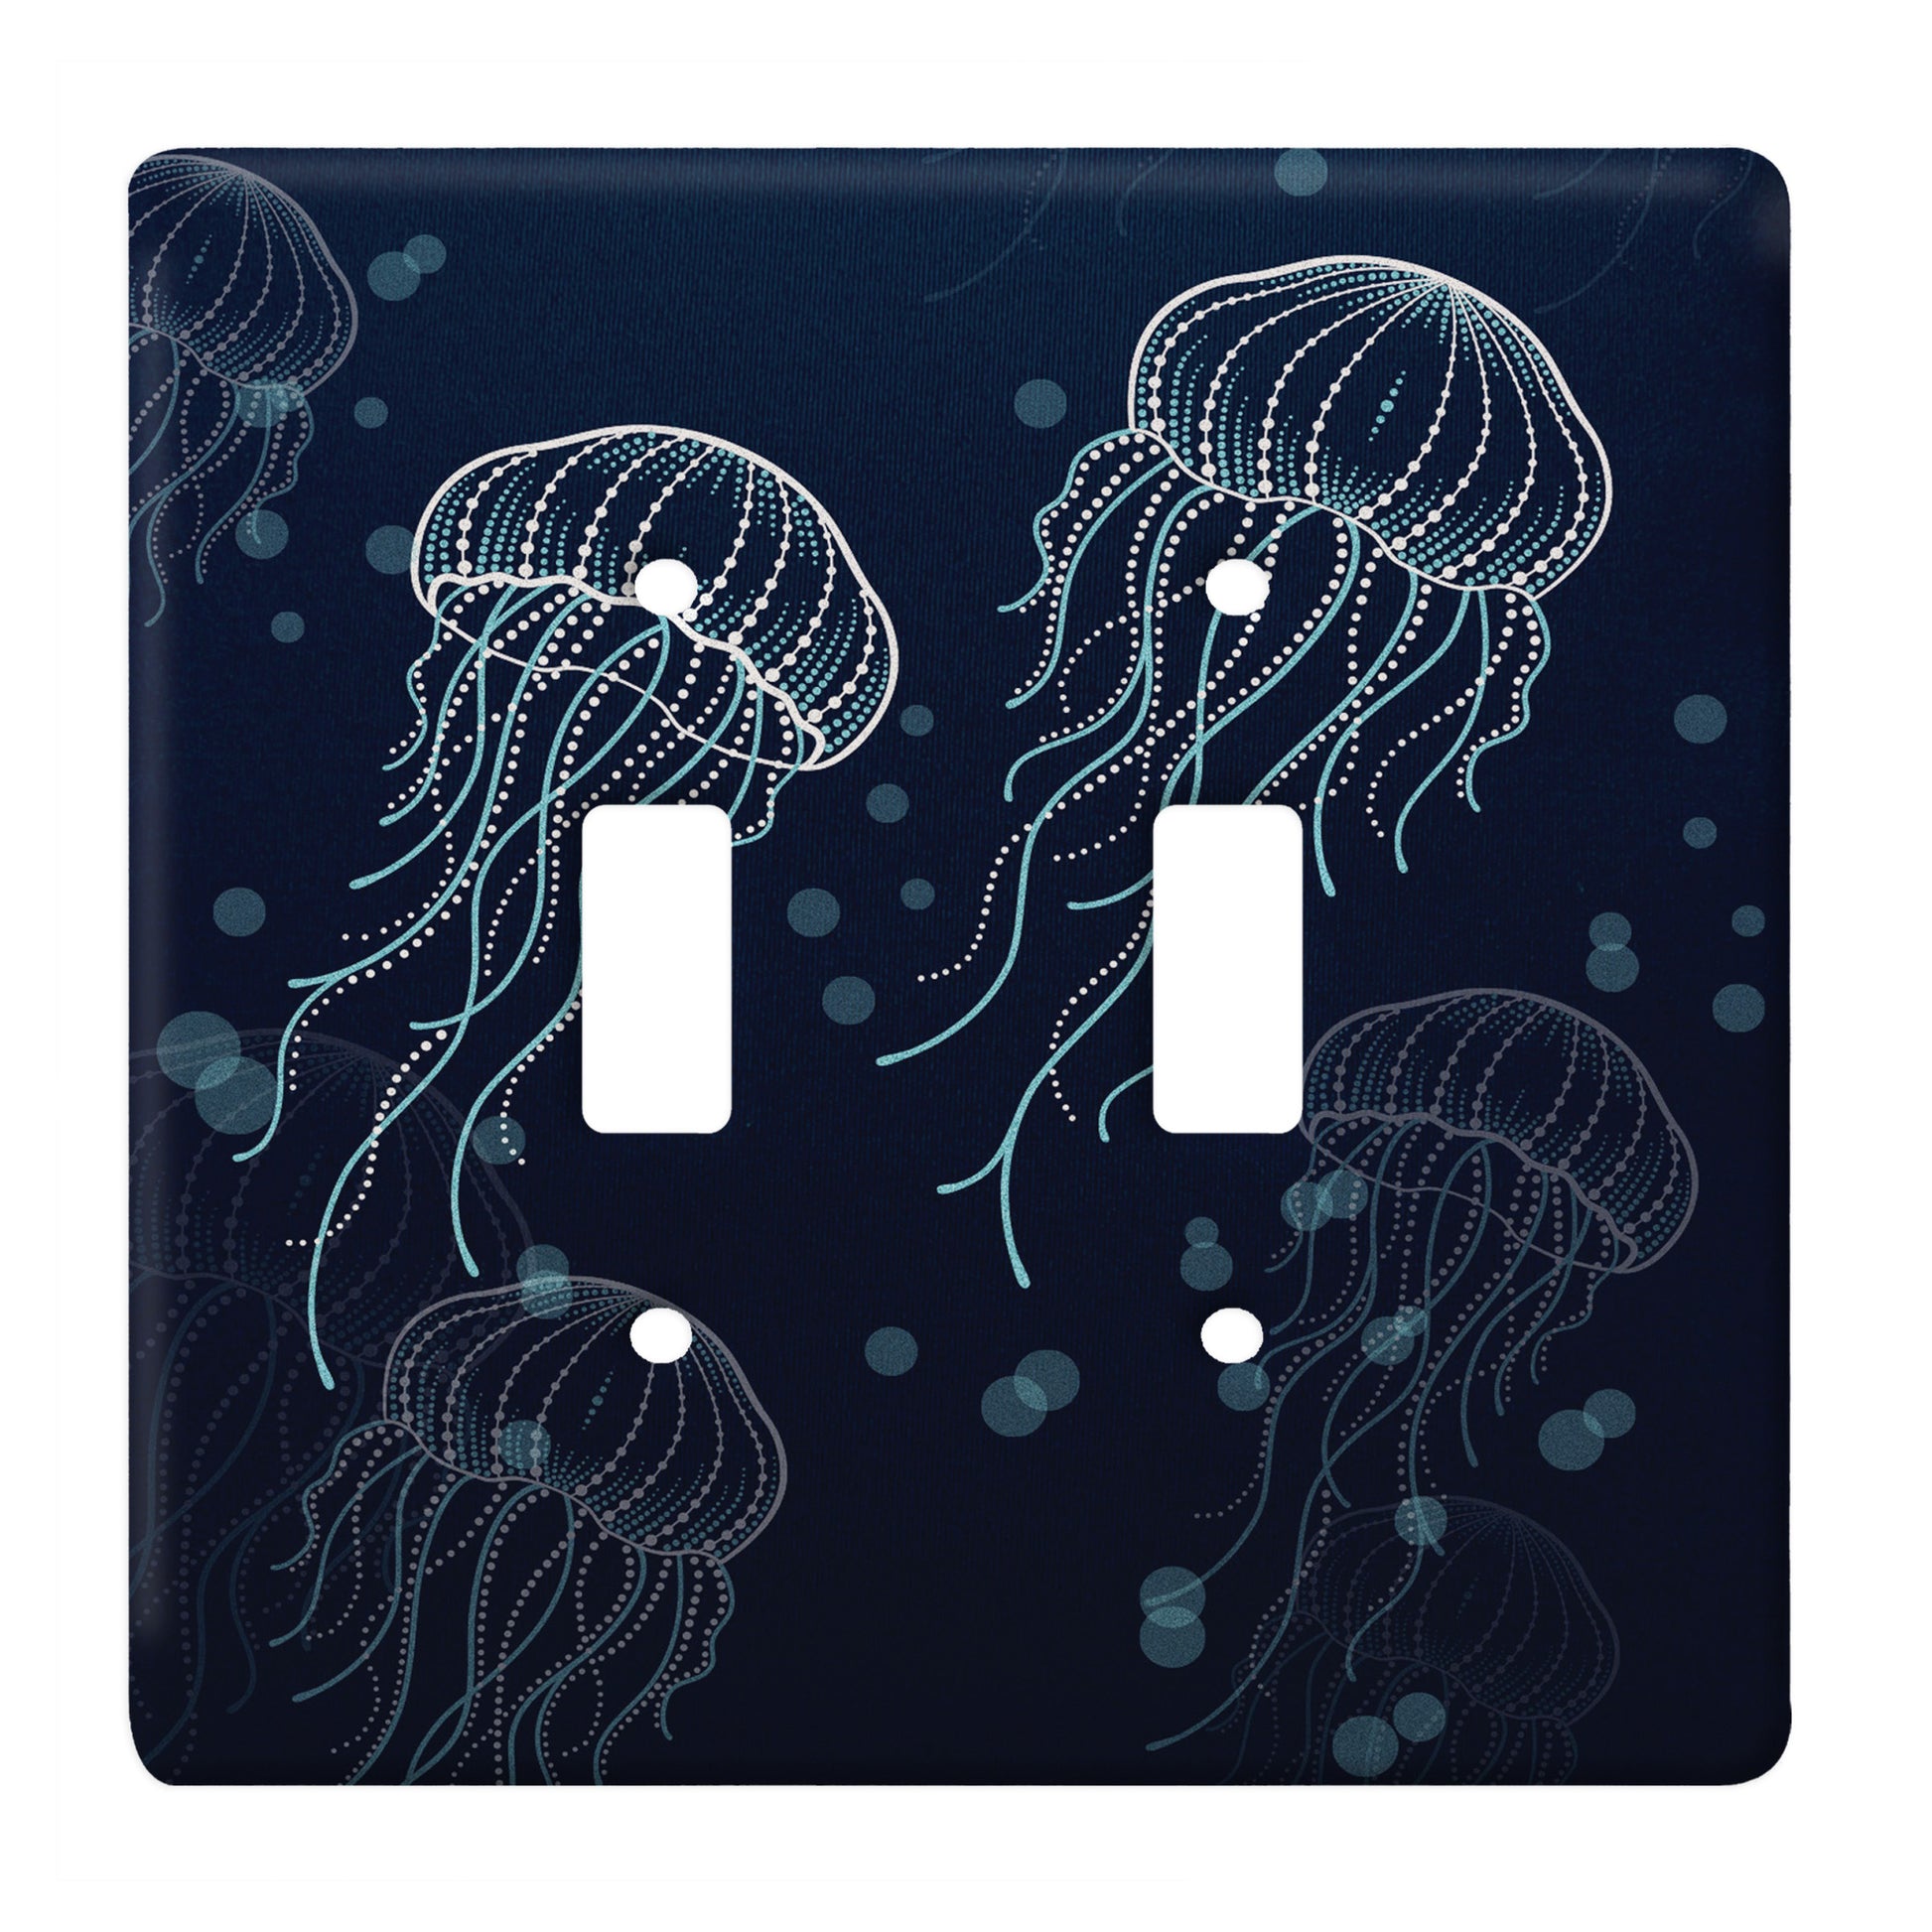 navy ceramic double toggle switch plate featuring blue jellyfish patterns.